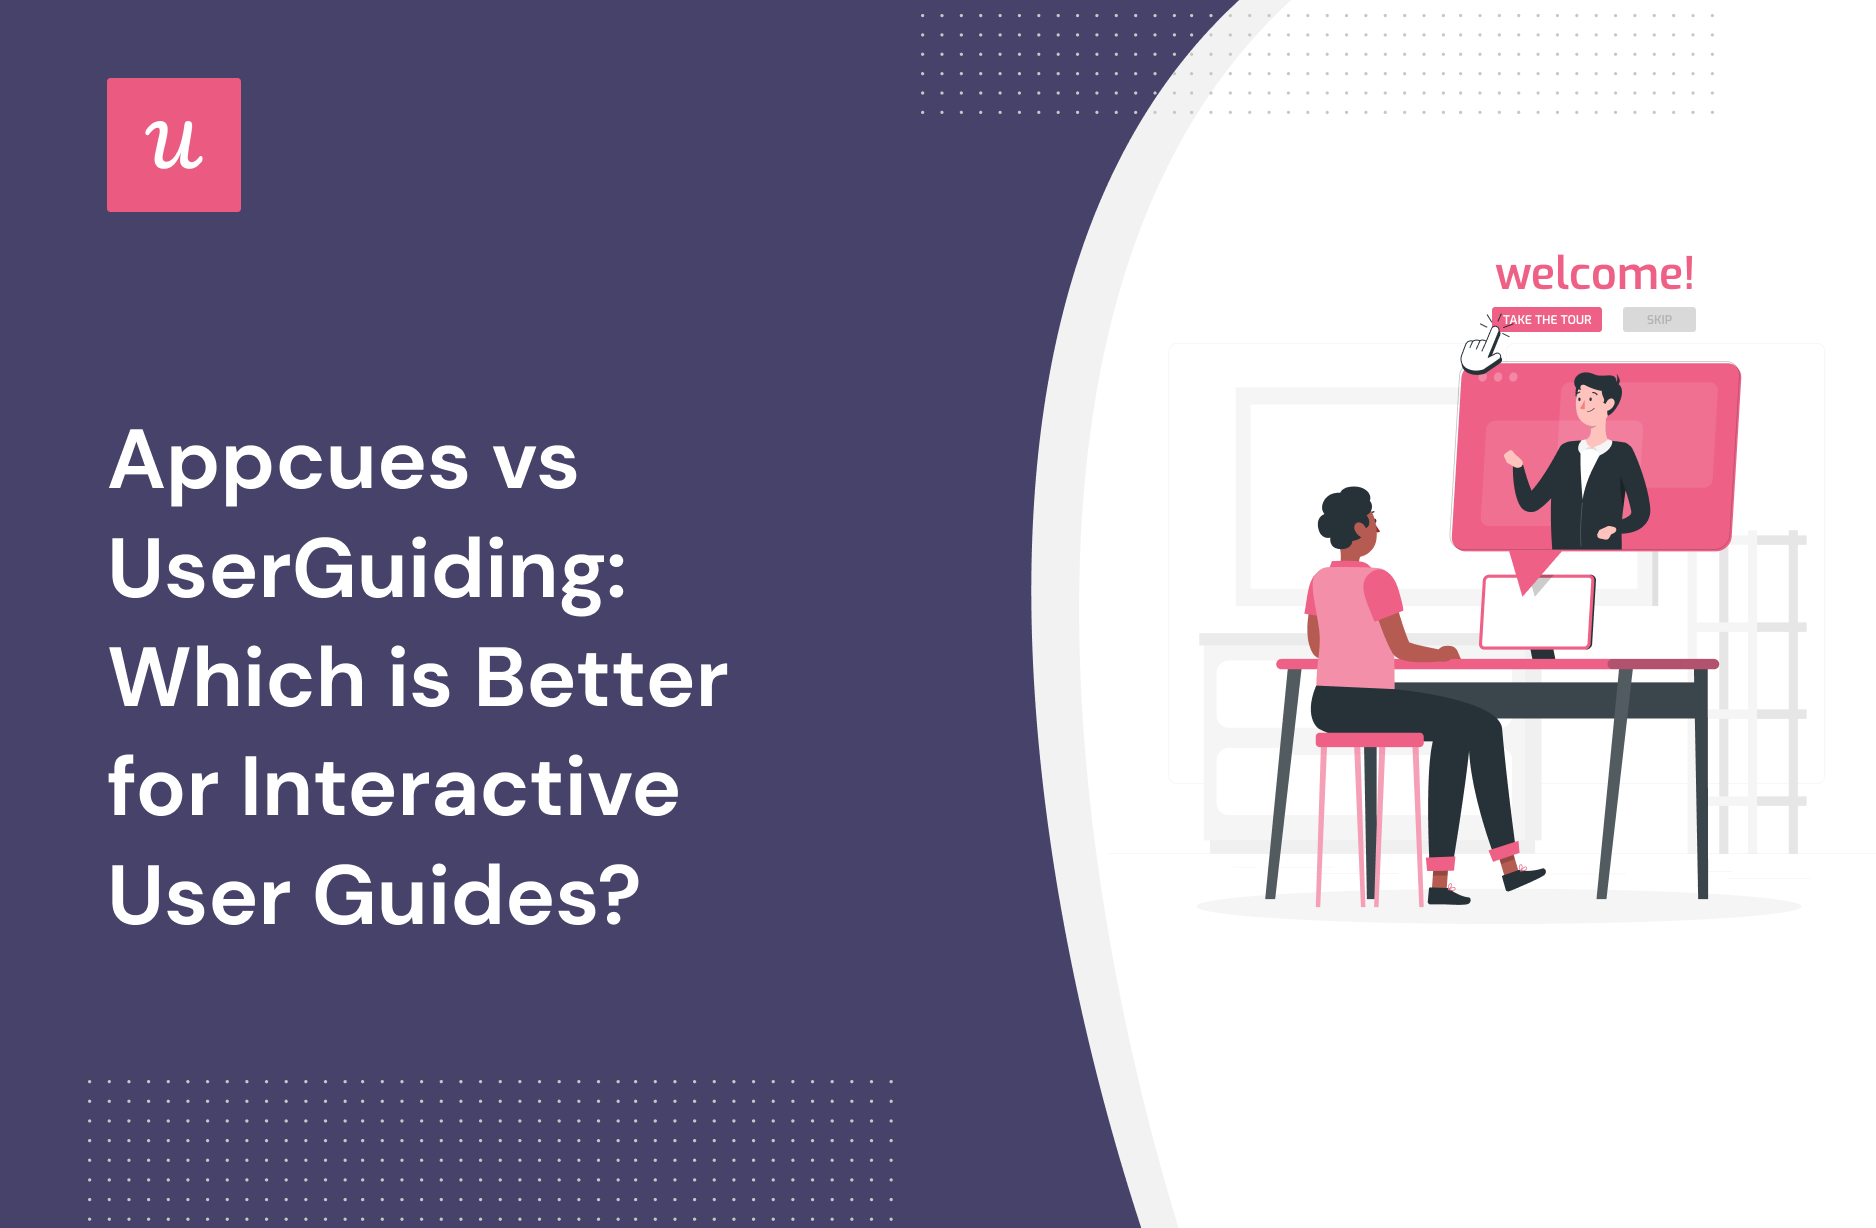 Appcues vs UserGuiding: Which is Better for Interactive User Guides?